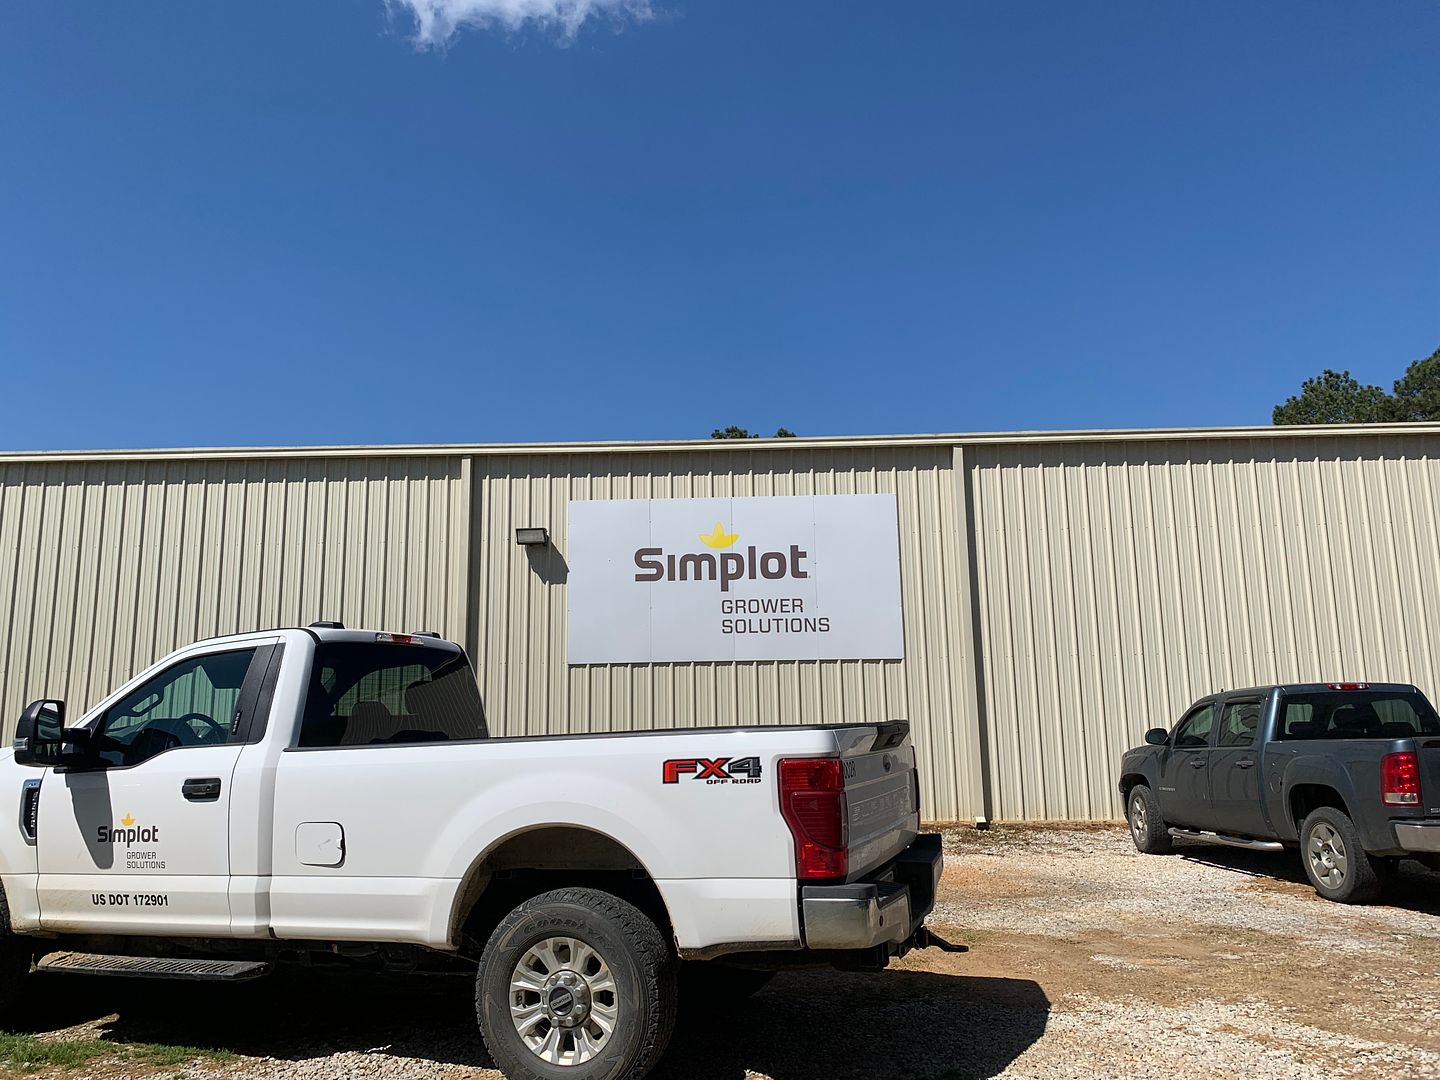 Slate Spring Fertilizer & Agricultural Seed Supplies | Simplot Grower Solutions